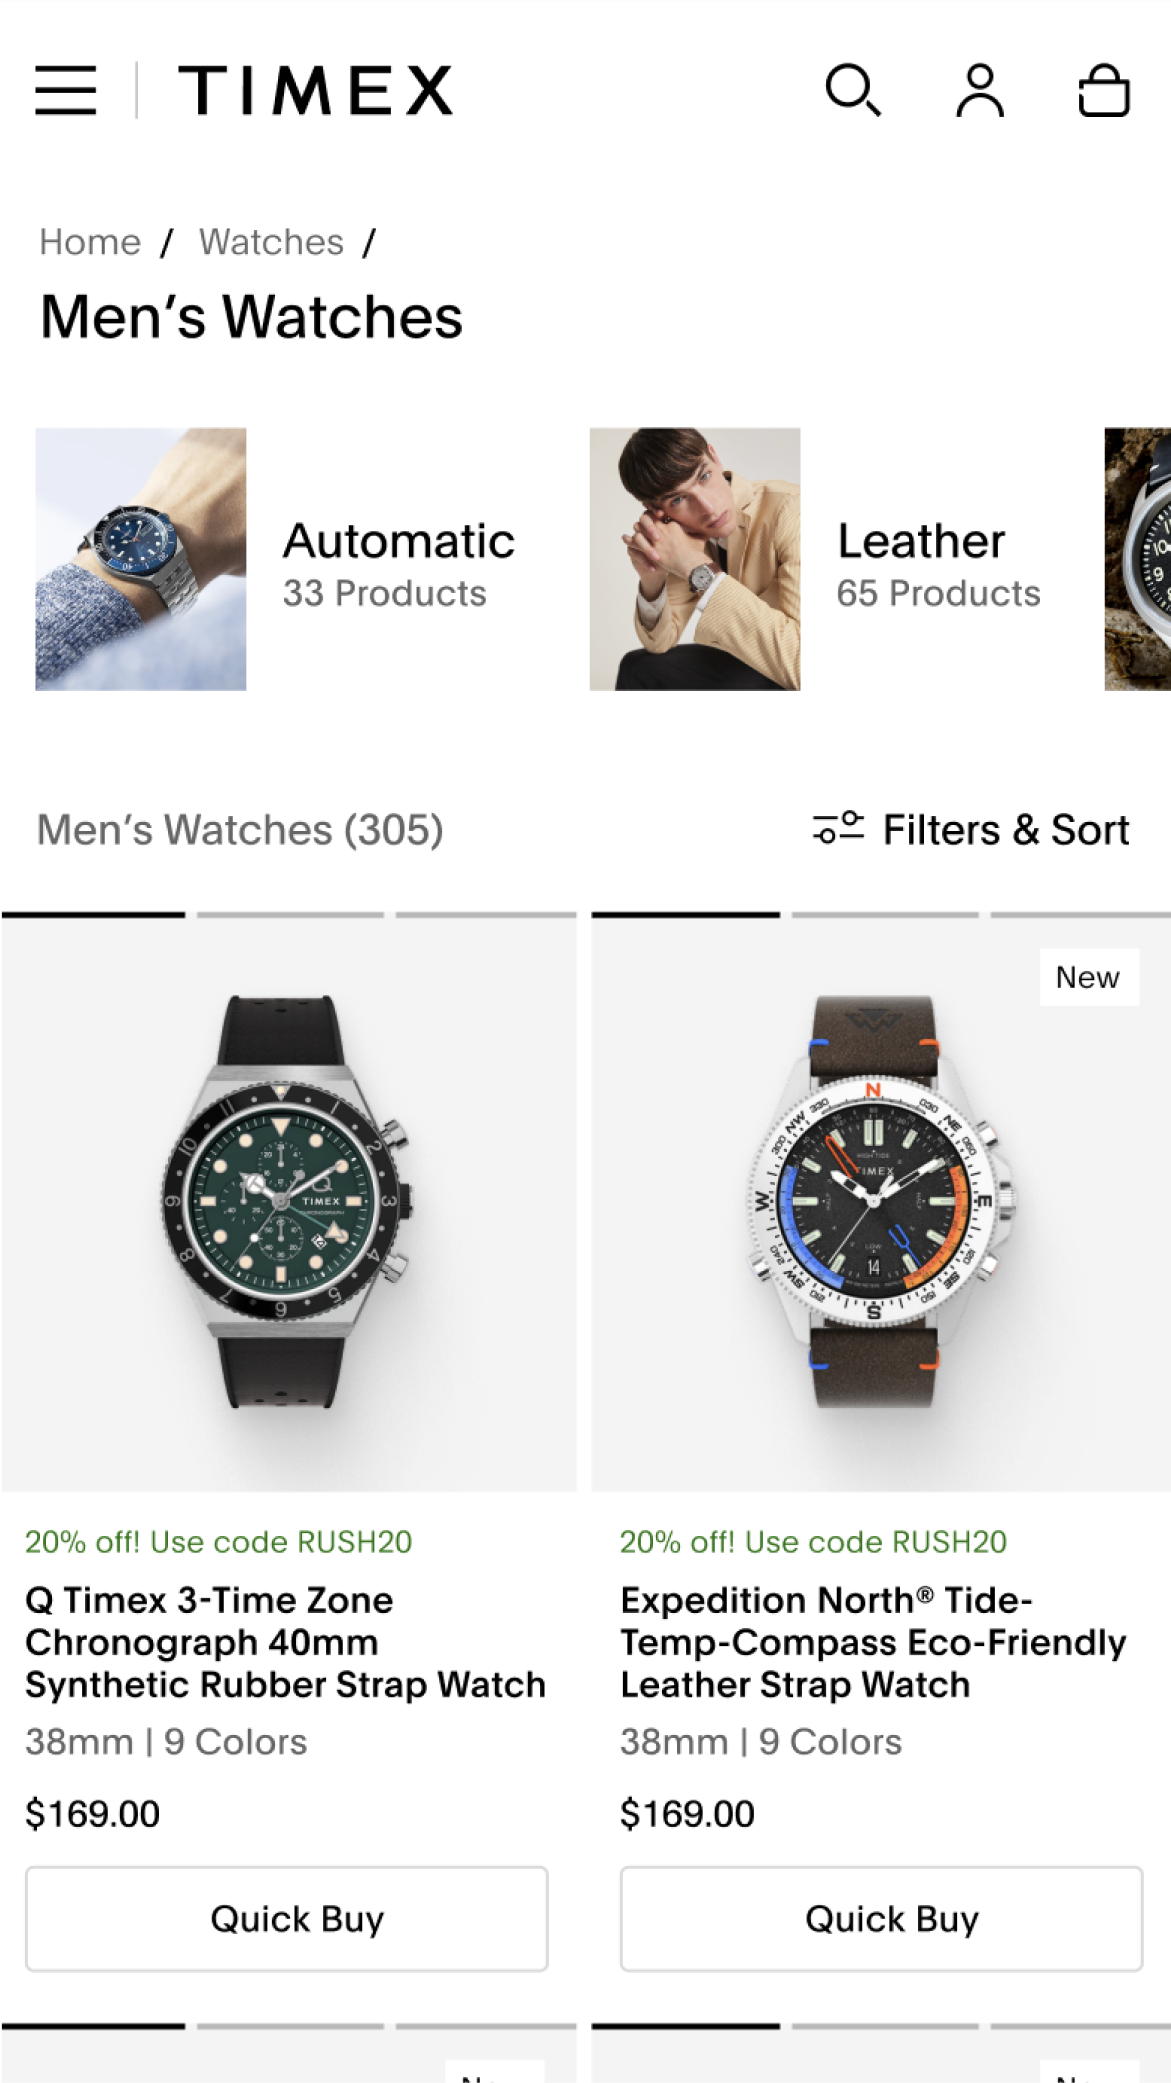 Mobile screenshot from Timex's PLP showing a few products